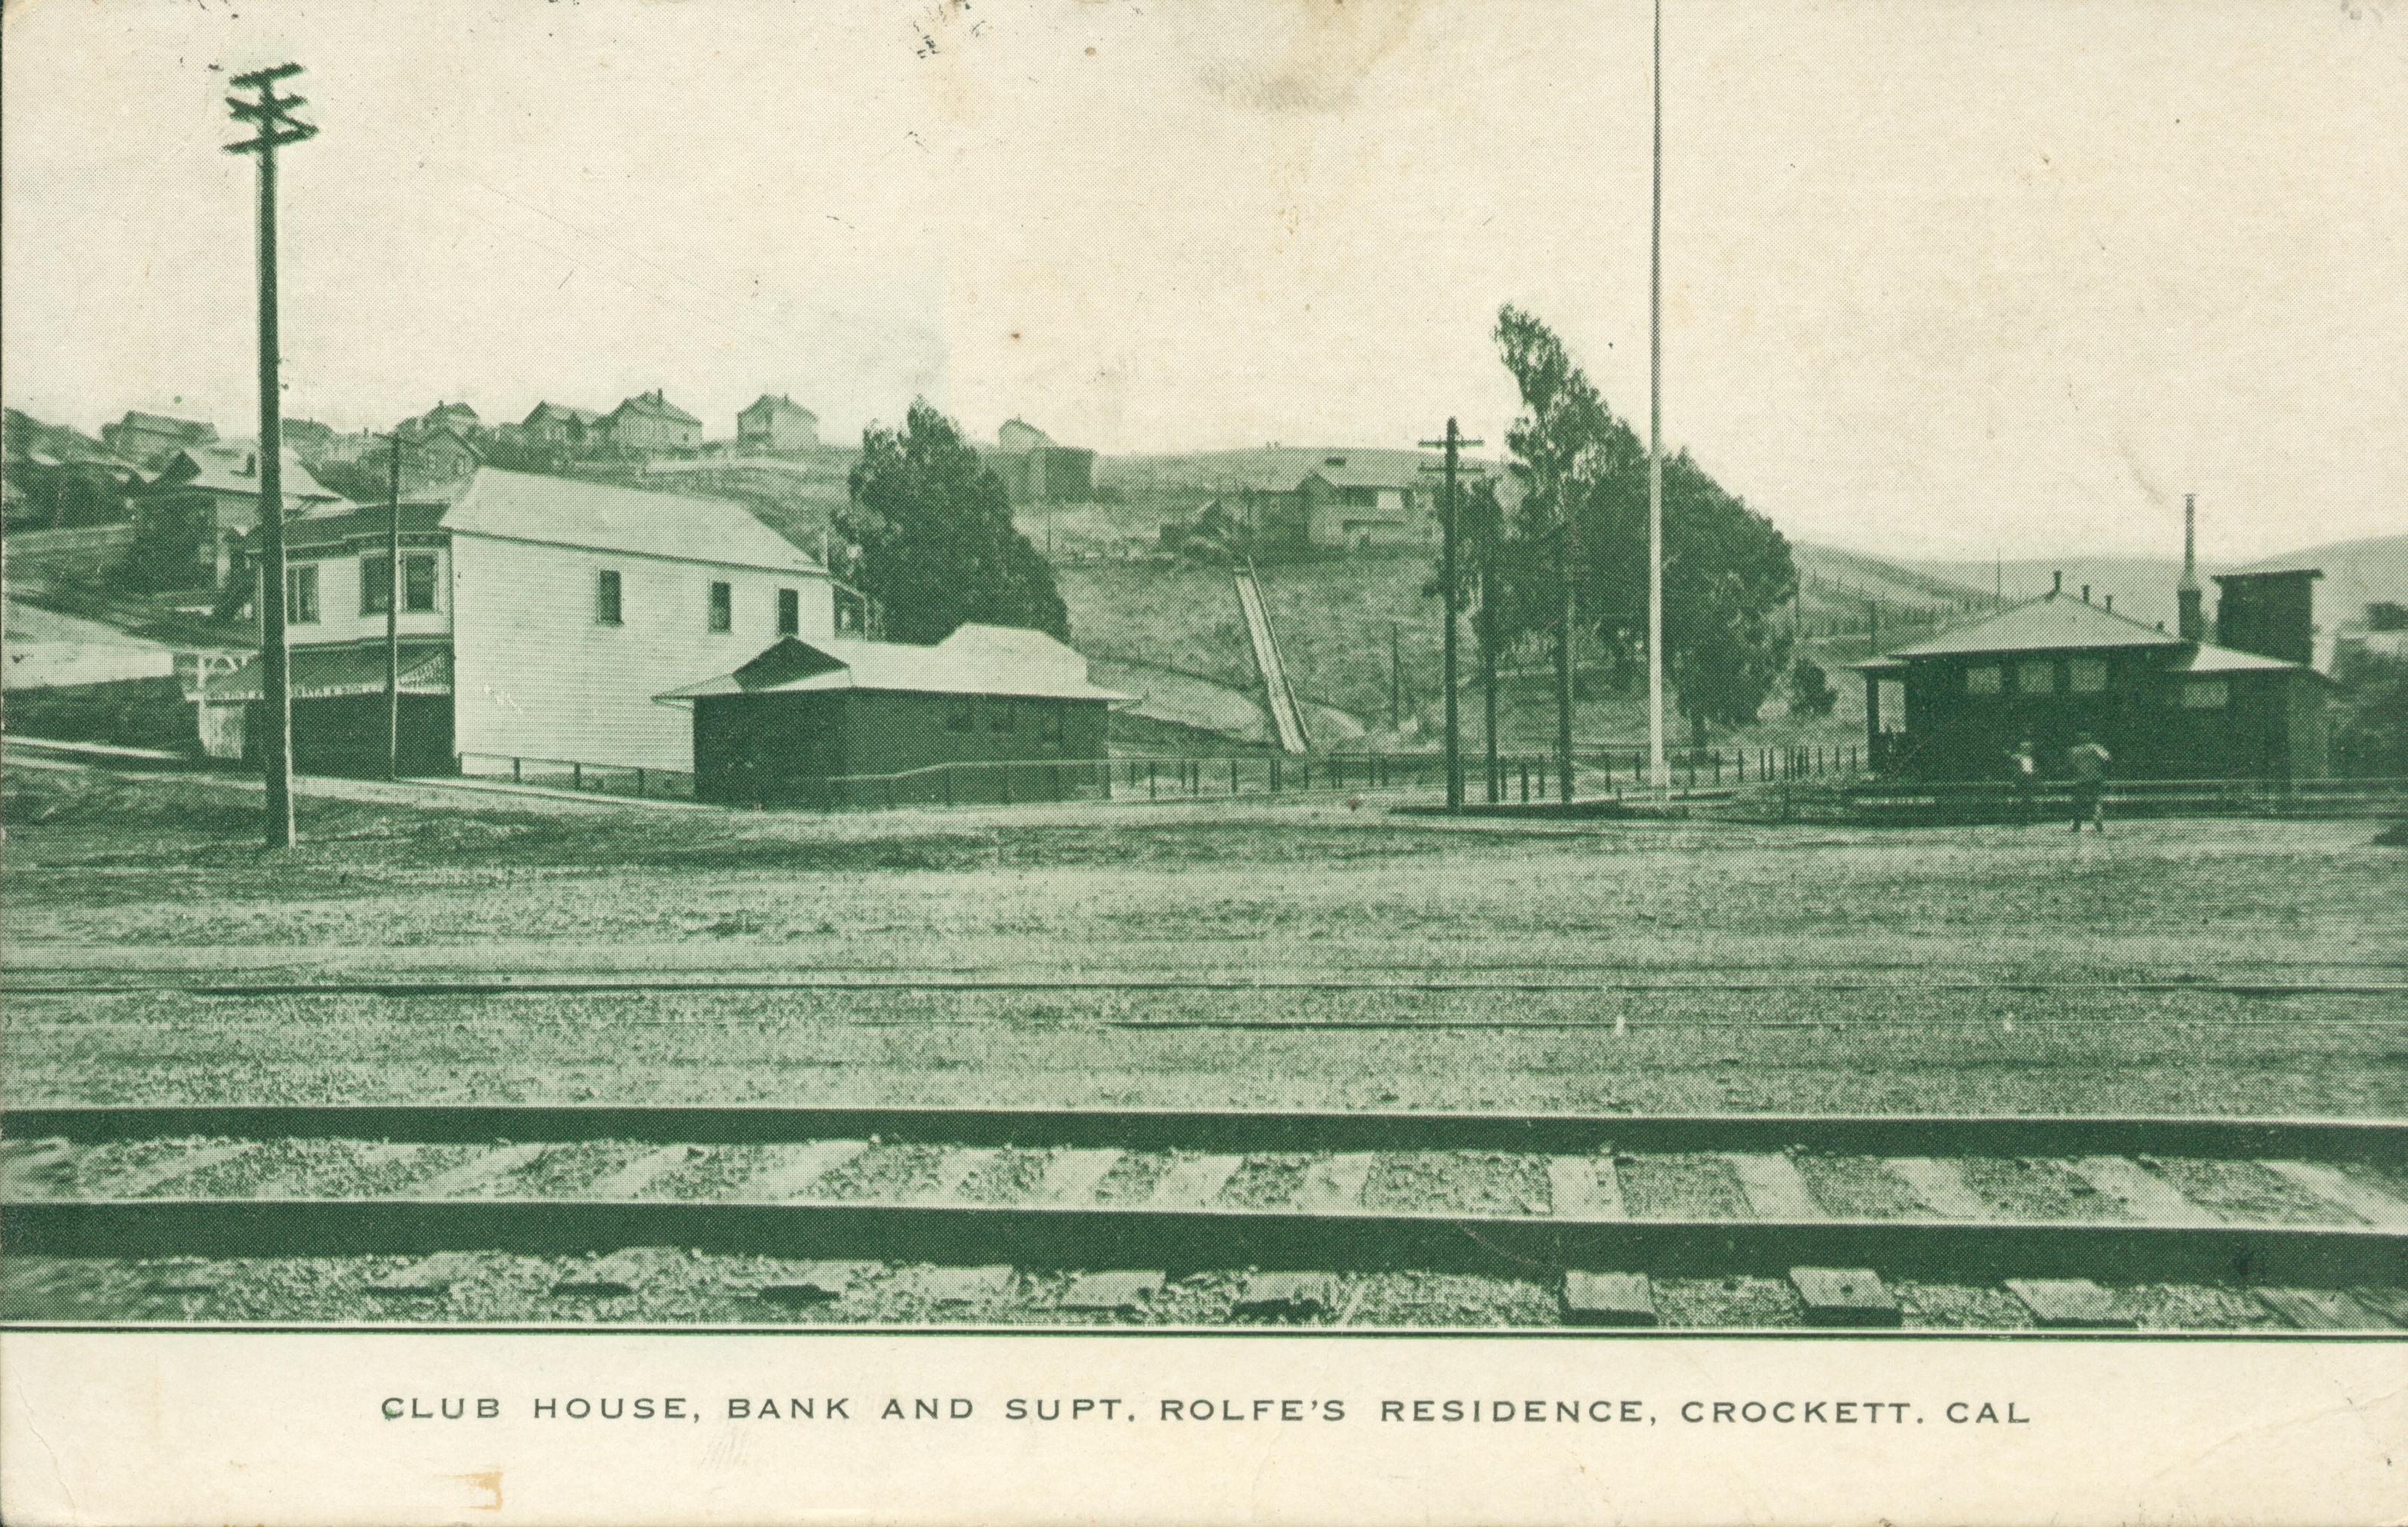 Several buildings with railroad tracks in the foreground